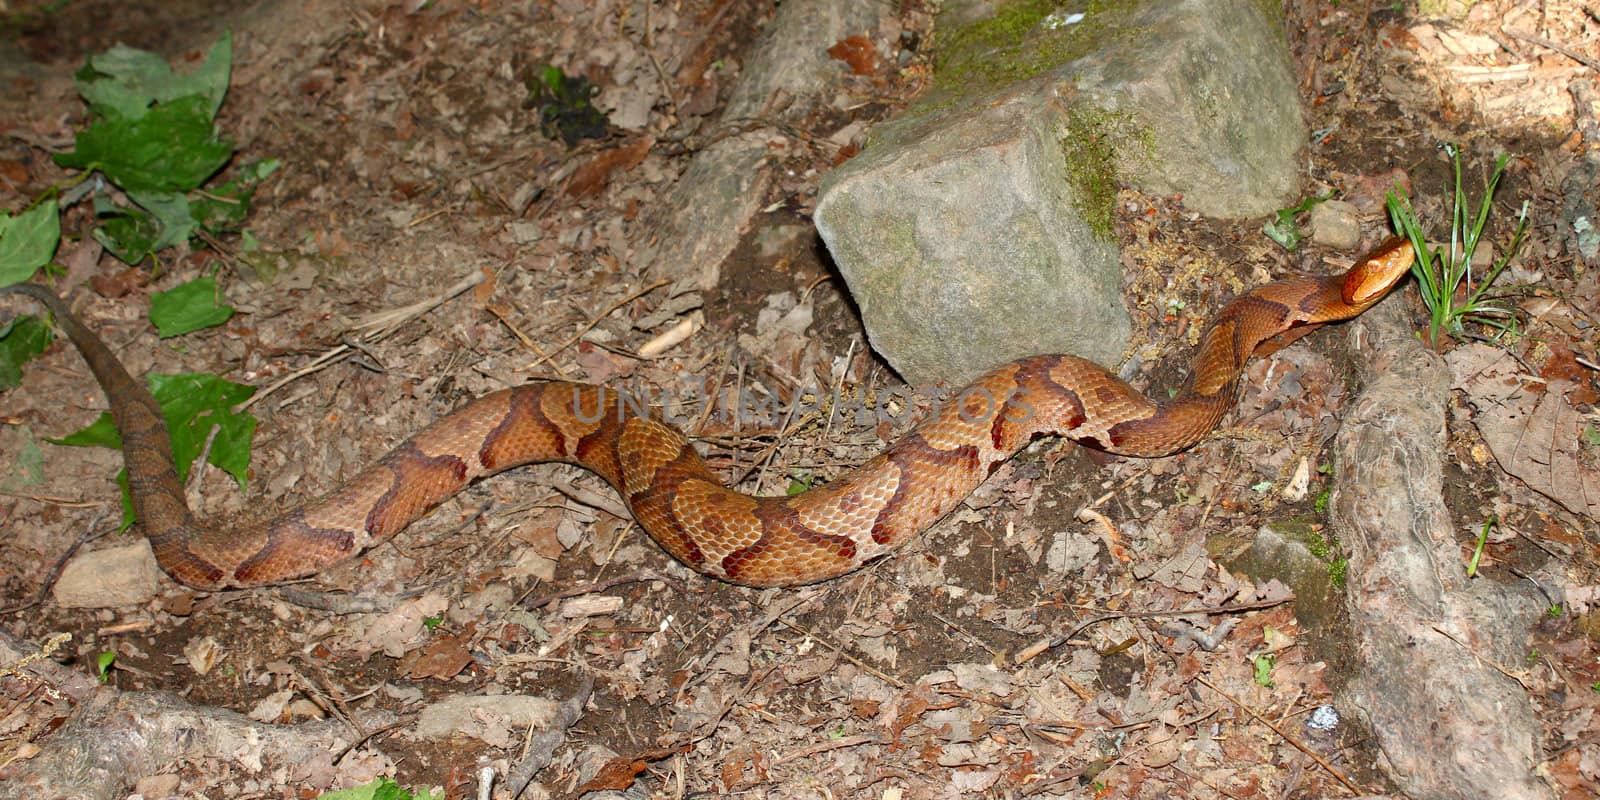 Copperhead Snake (Agkistrodon contortrix) by Wirepec